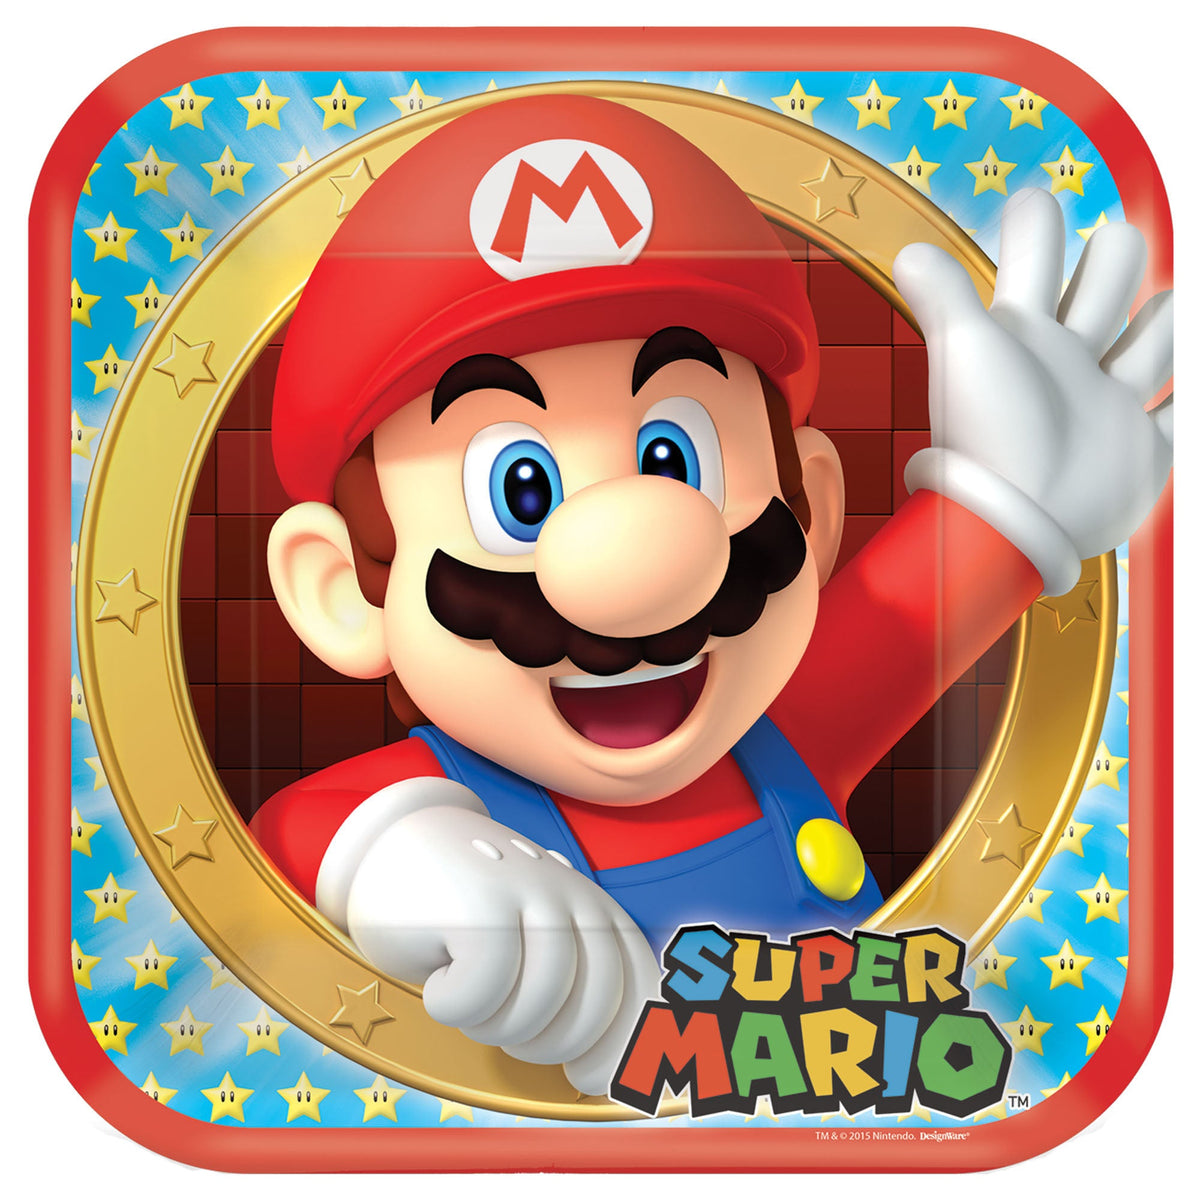 Super Mario Brothers™ 9" Square Plates Package of 8